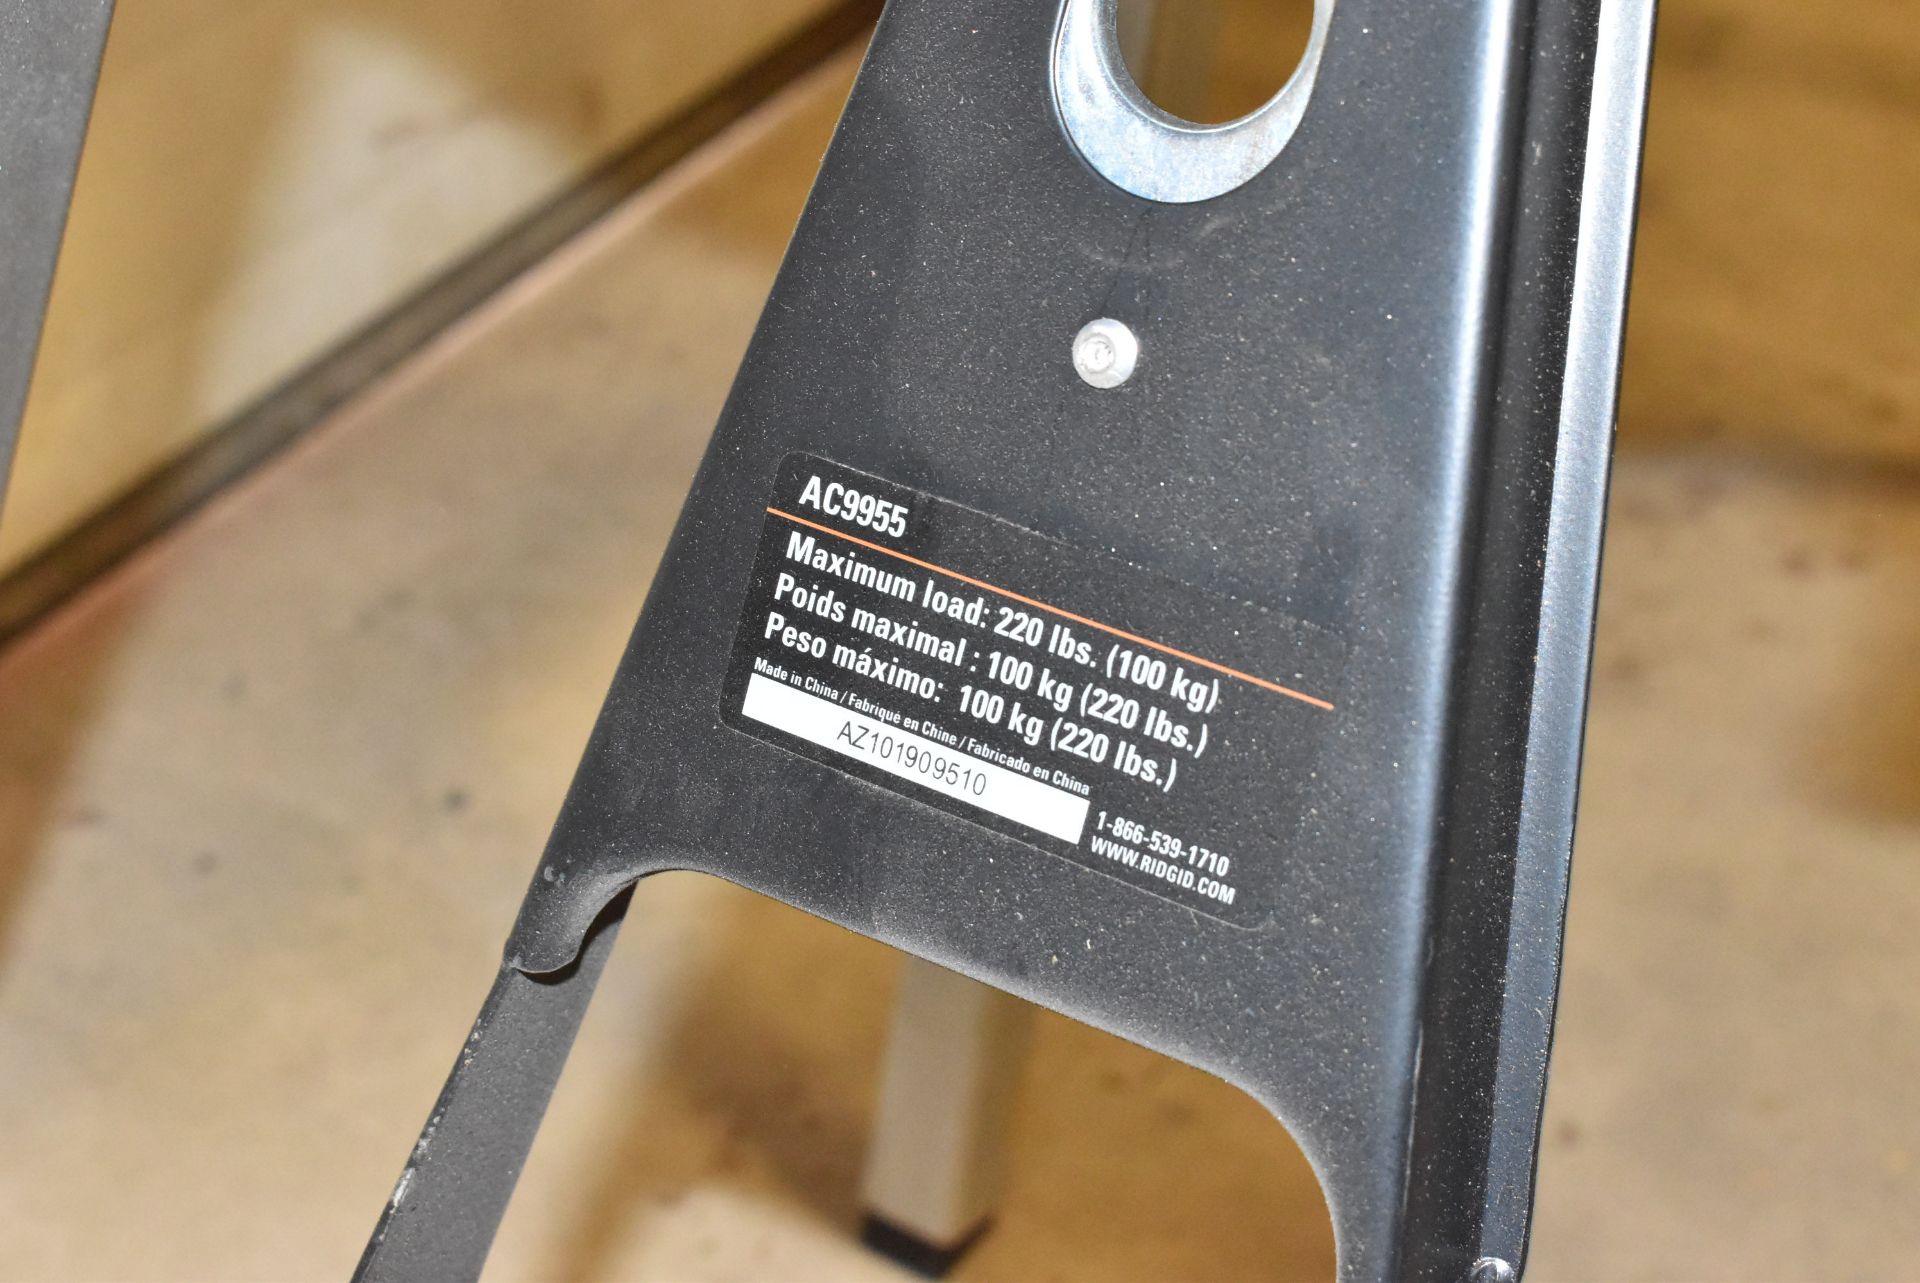 LOT/ (2) RIDGID AC9955 CLAMPING STANDS WITH 220 LBS CAPACITY - Image 3 of 3